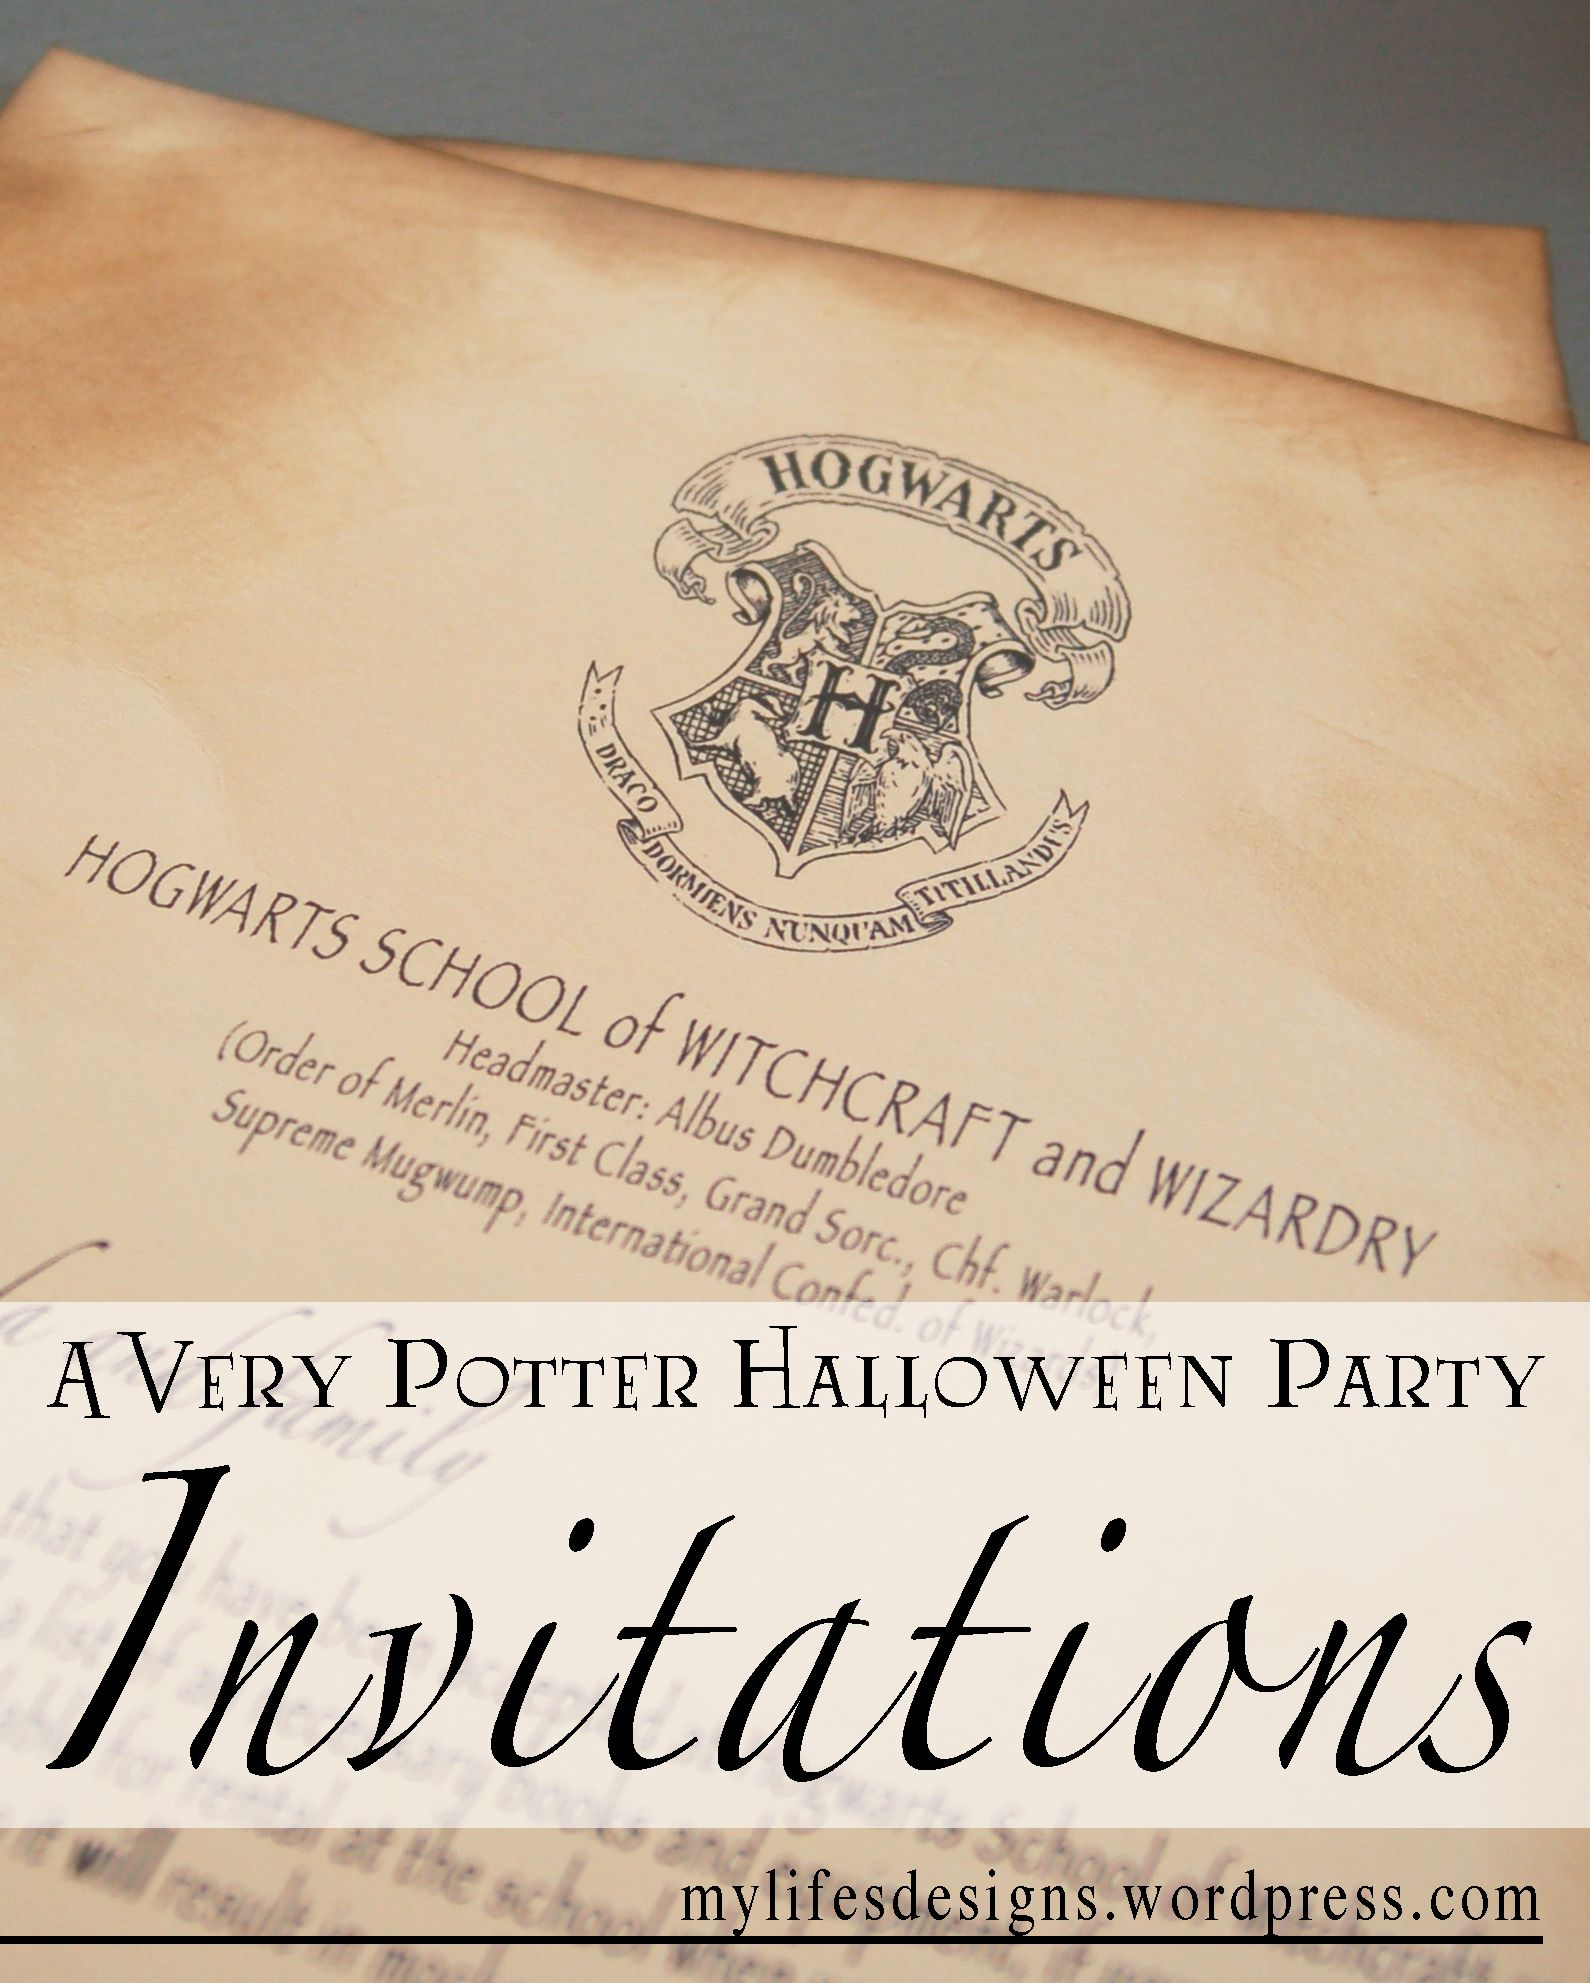 A Very Potter Halloween Party Invitations Diy Projects I Might regarding measurements 1590 X 1983